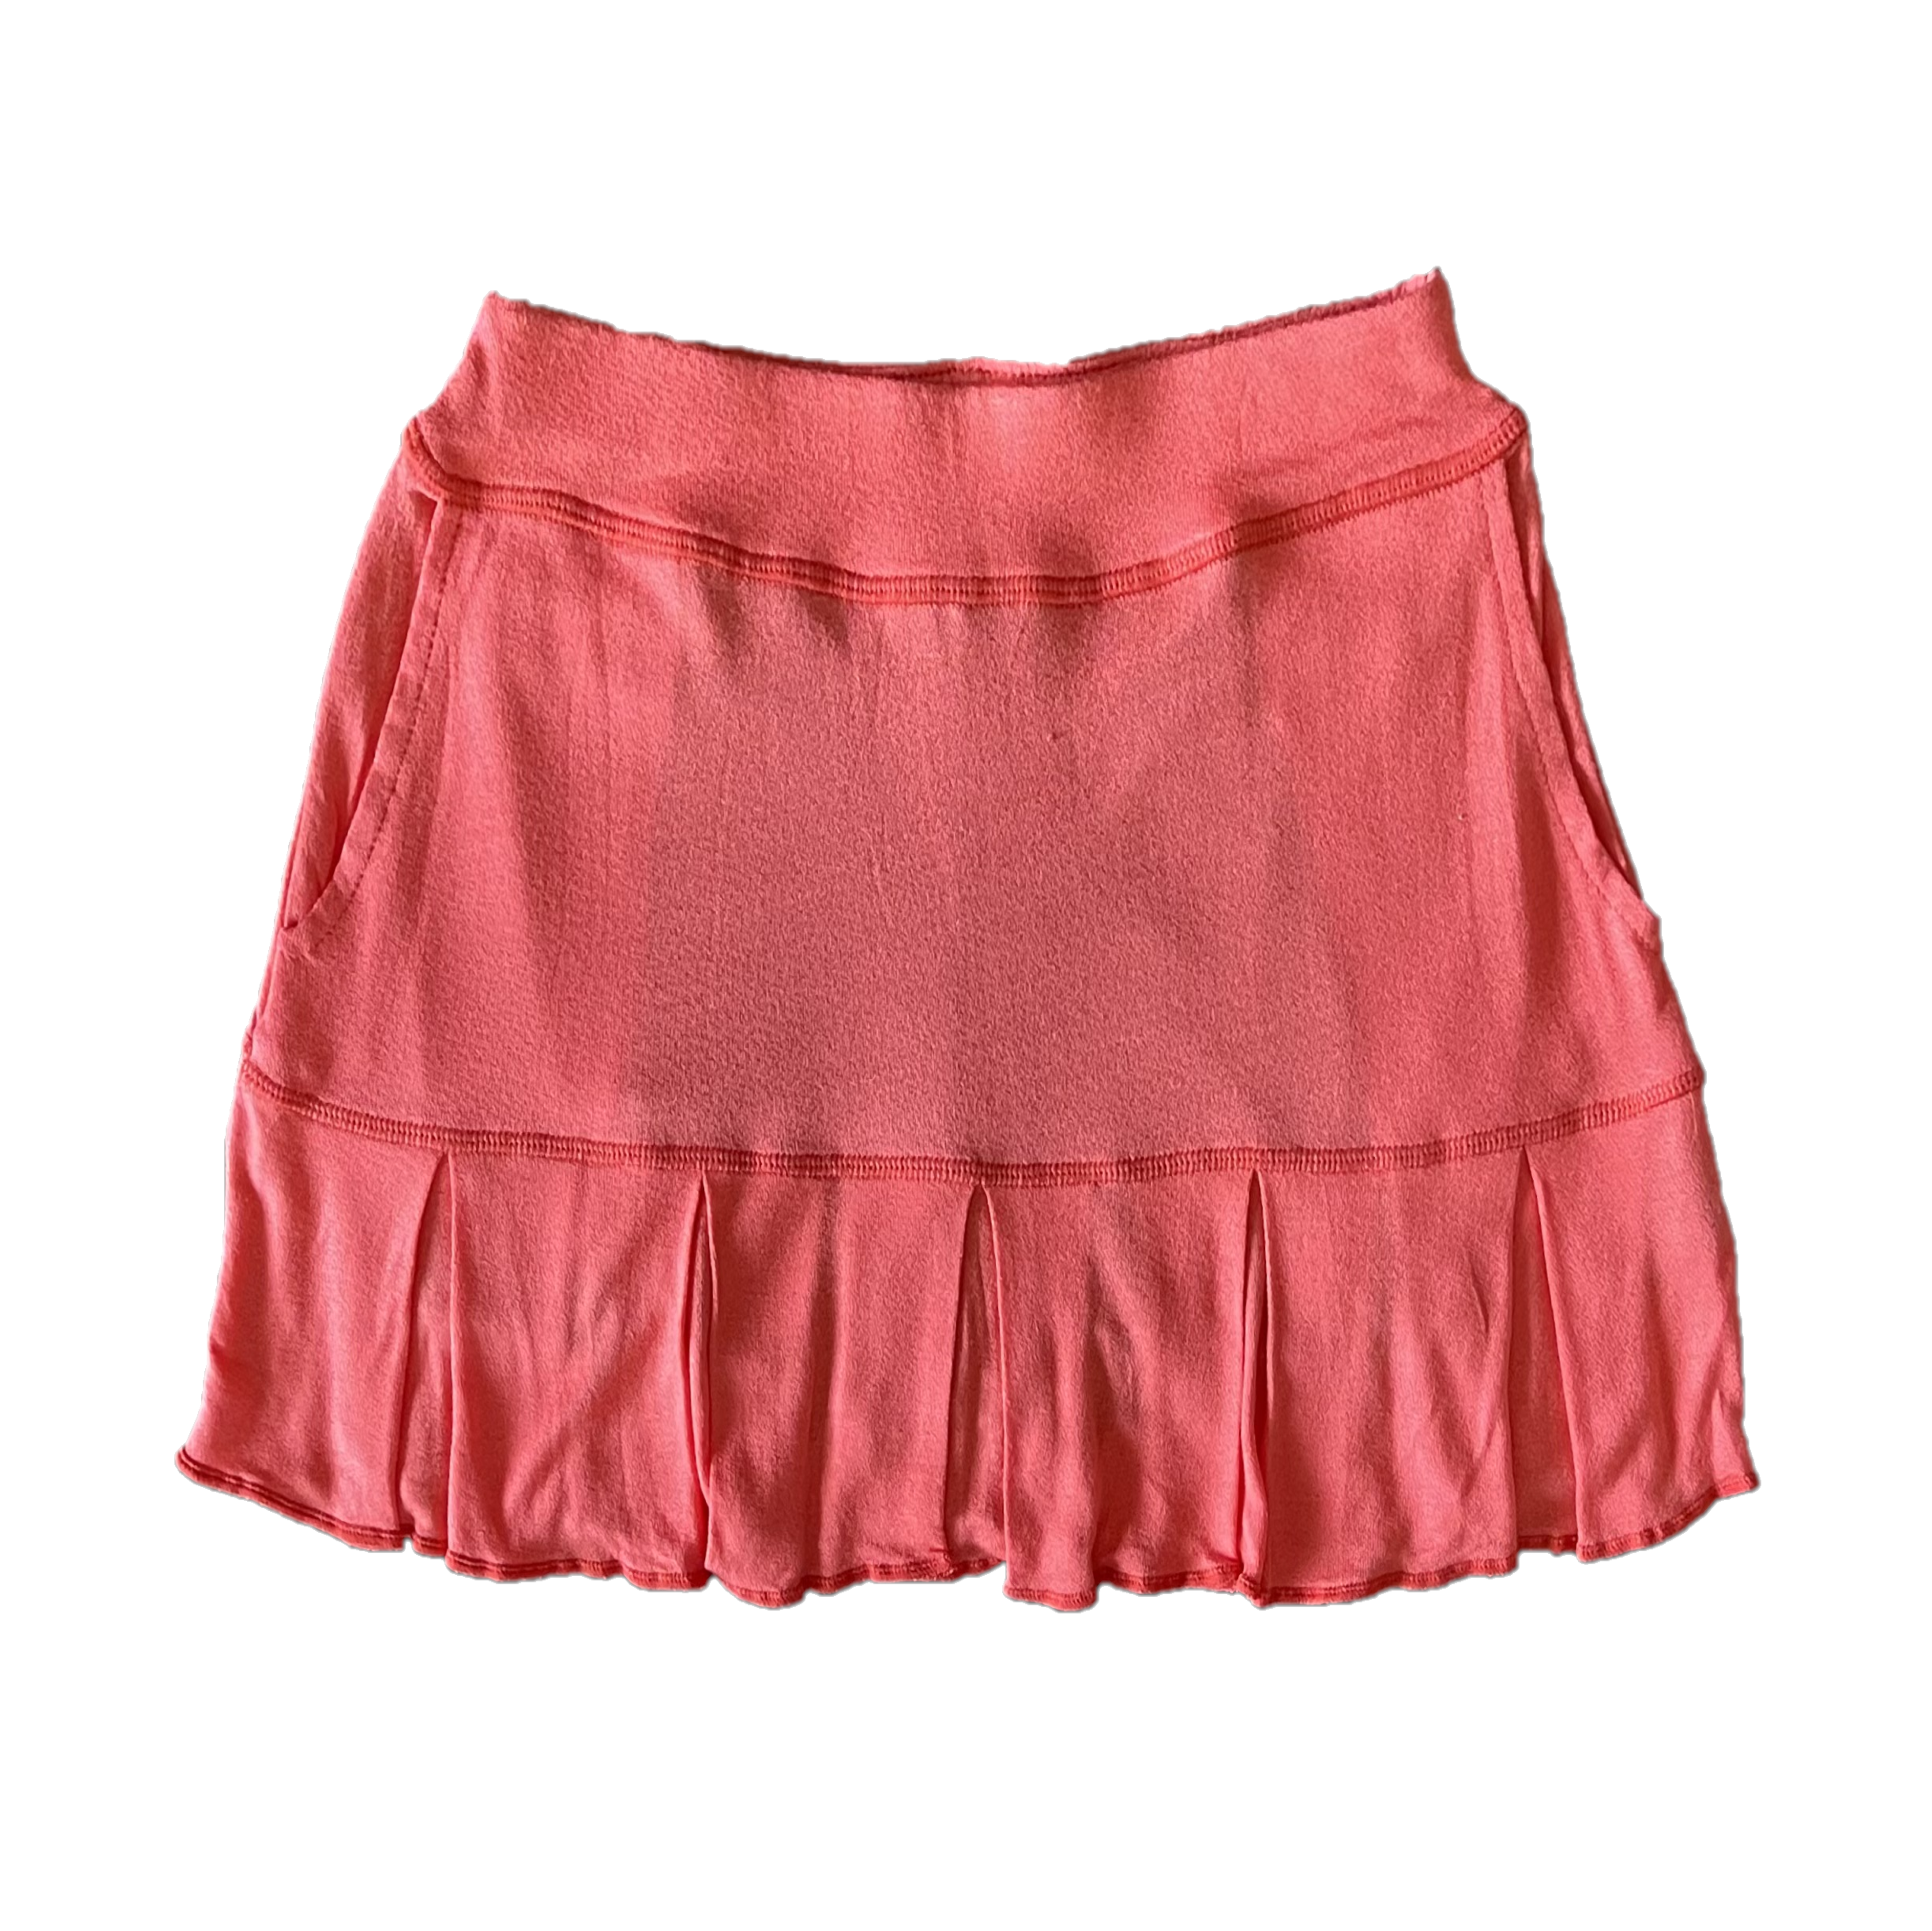 LS-064A || Skirt Ultra Soft Feel Tangerine with All Around Swing Pleats and 2 Rear Pockets